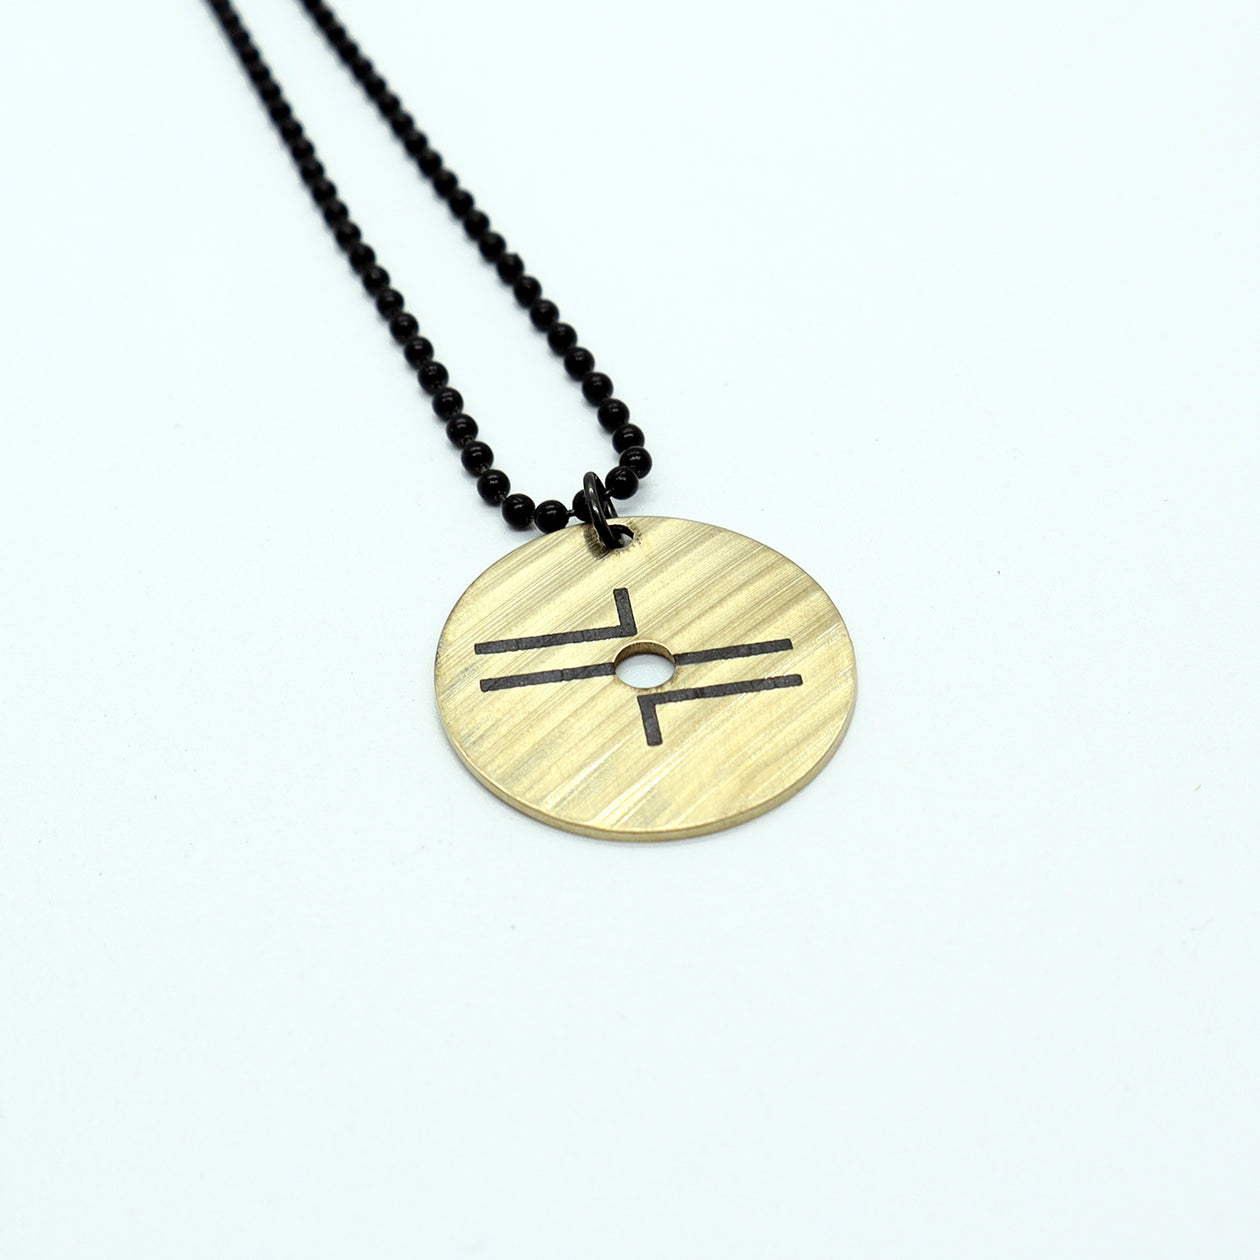 Thrice Circle - Reclaimed Cymbal Necklace